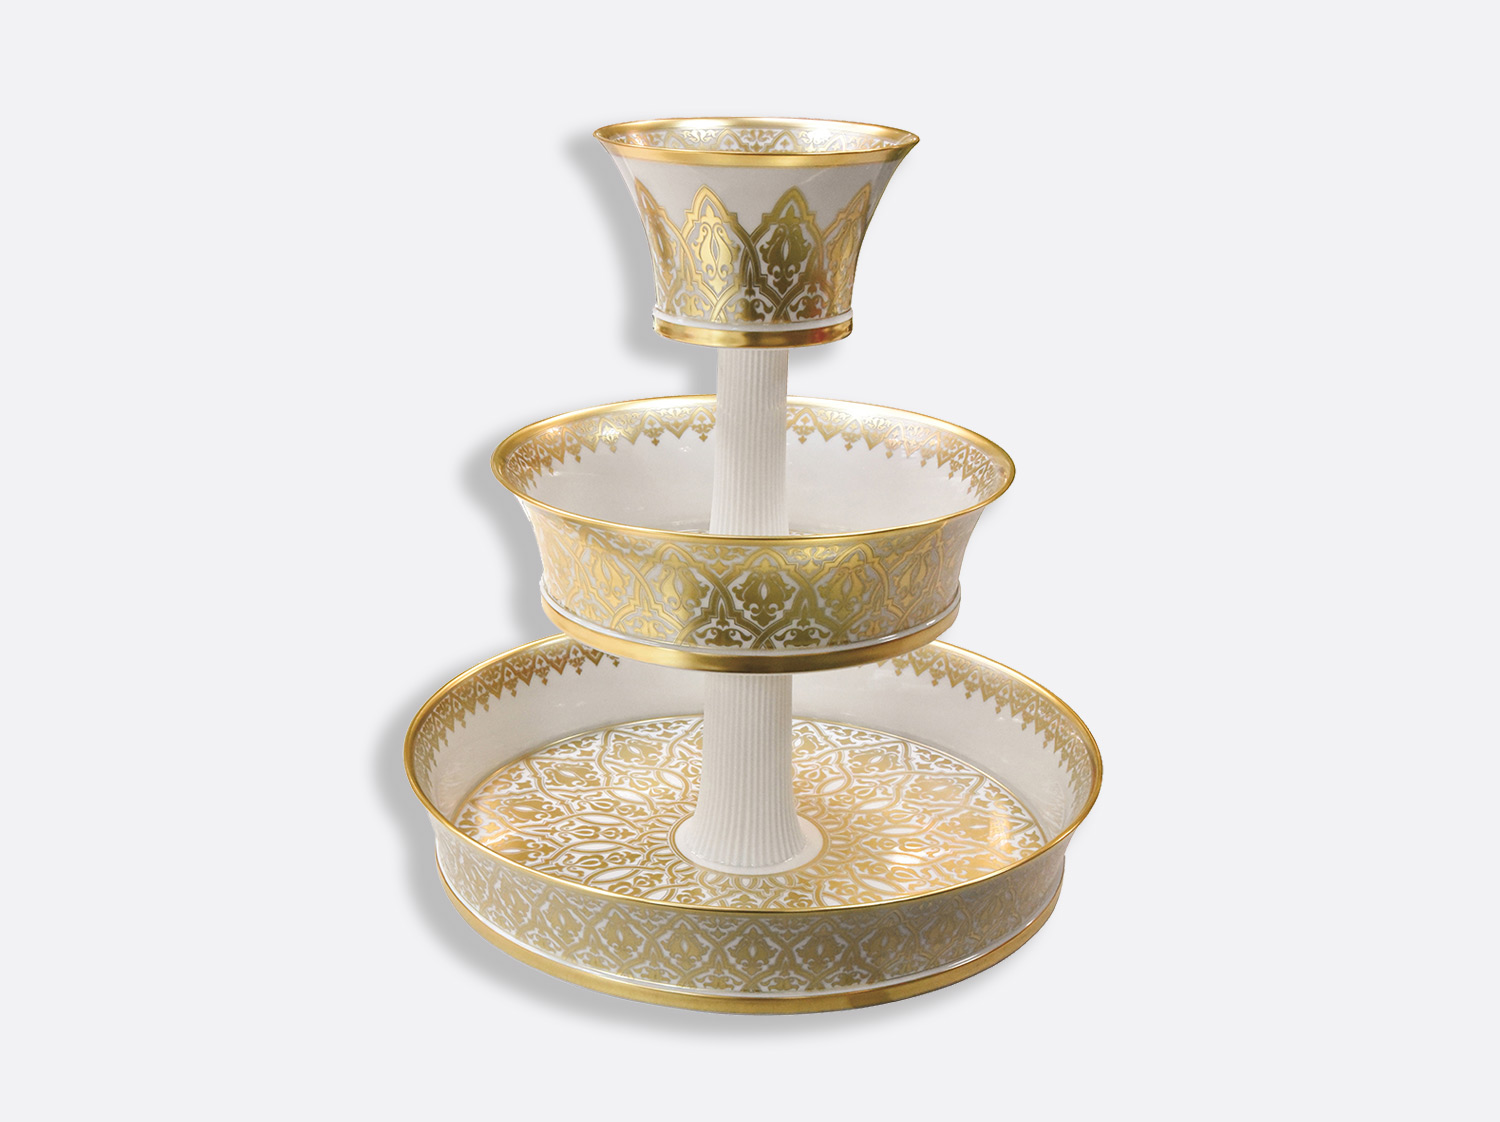 China 3 tier trays H. 20" D. 18" of the collection Venise | Bernardaud